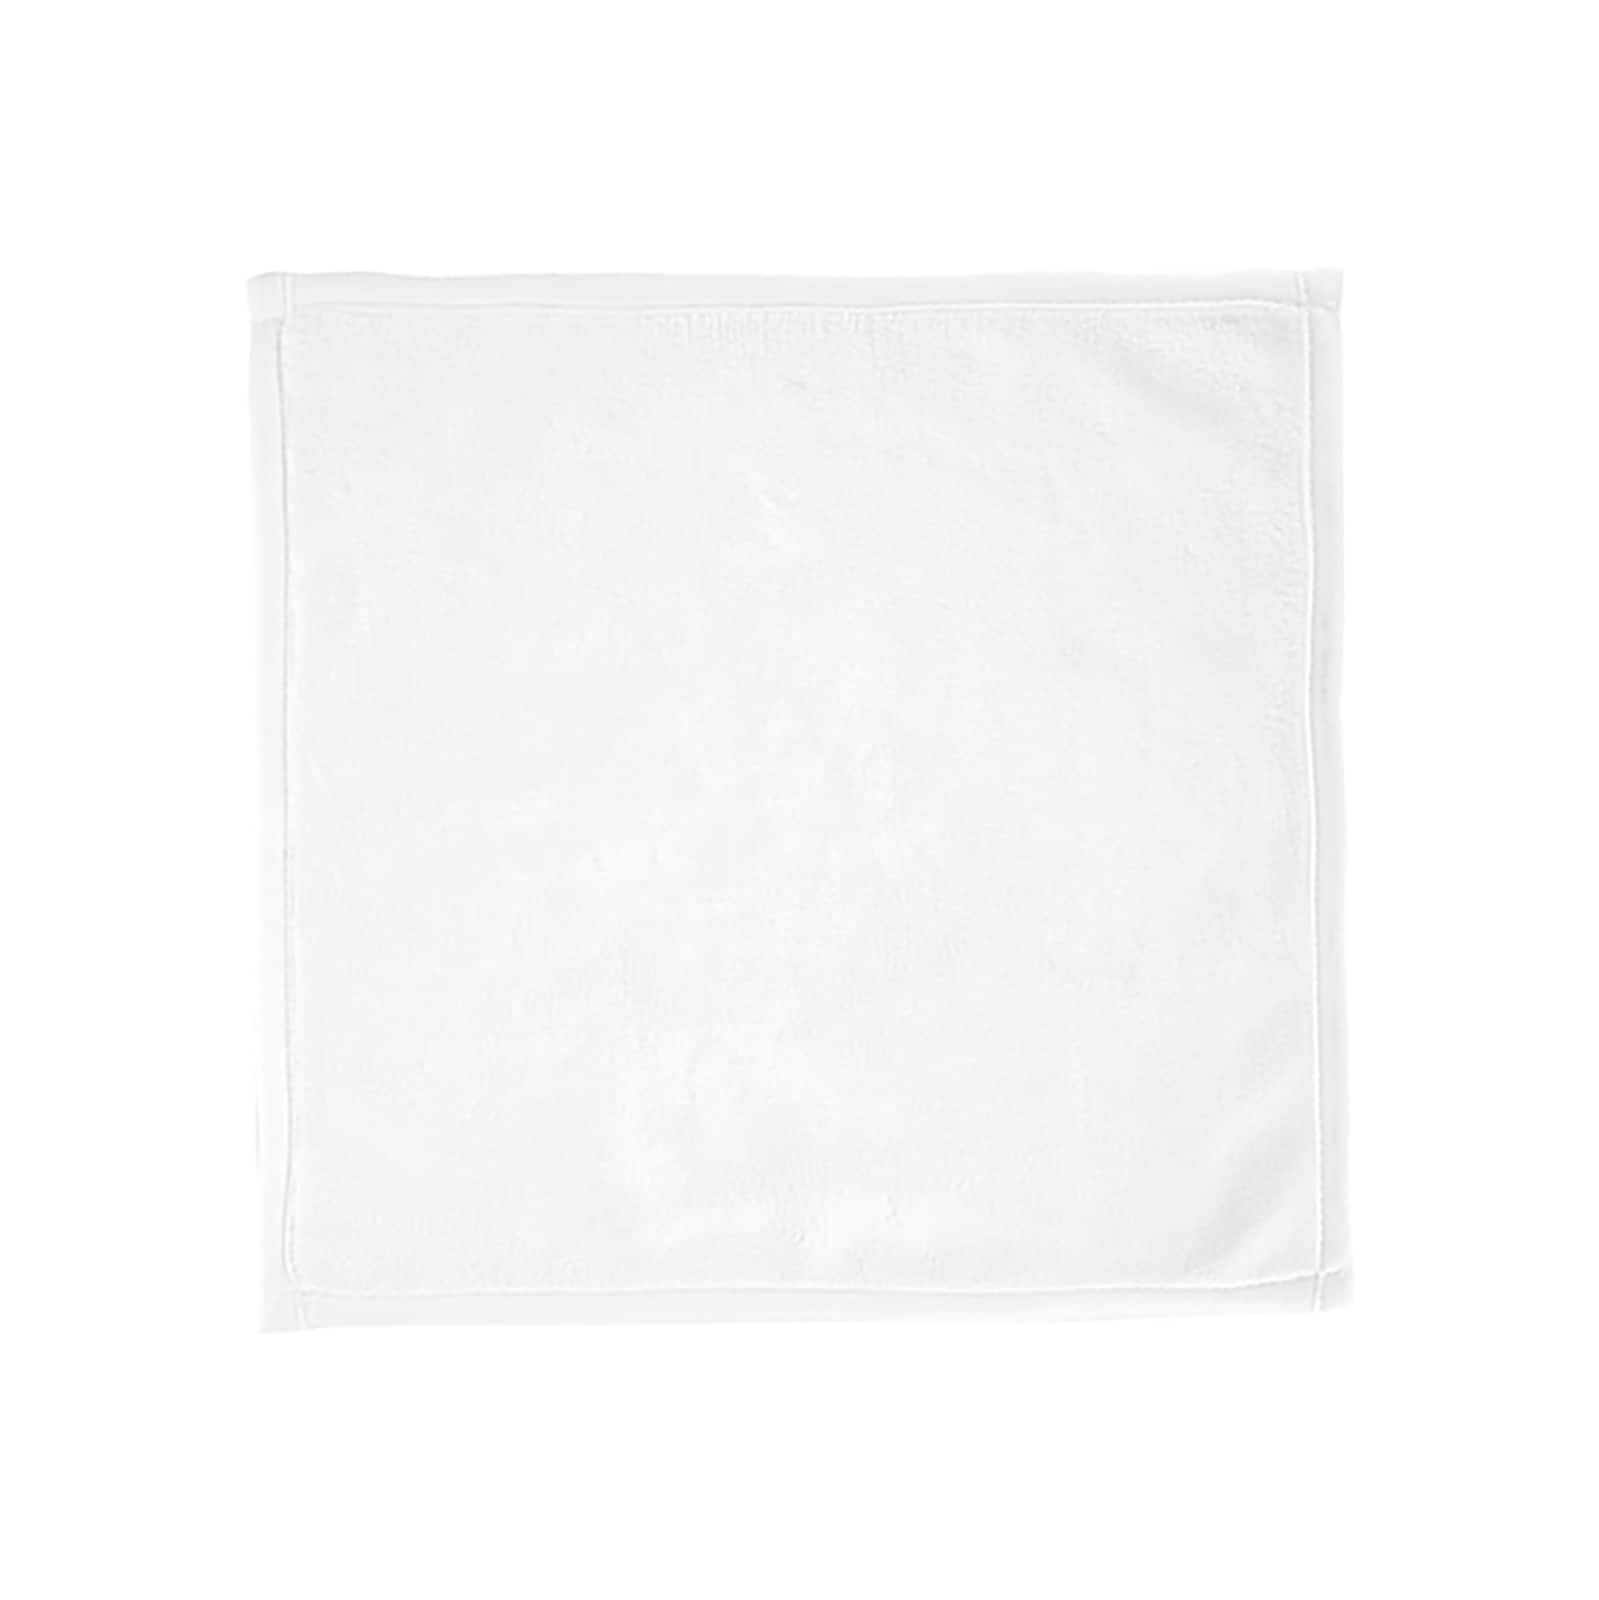 Craft Express White Square Hand Towel, 4ct.